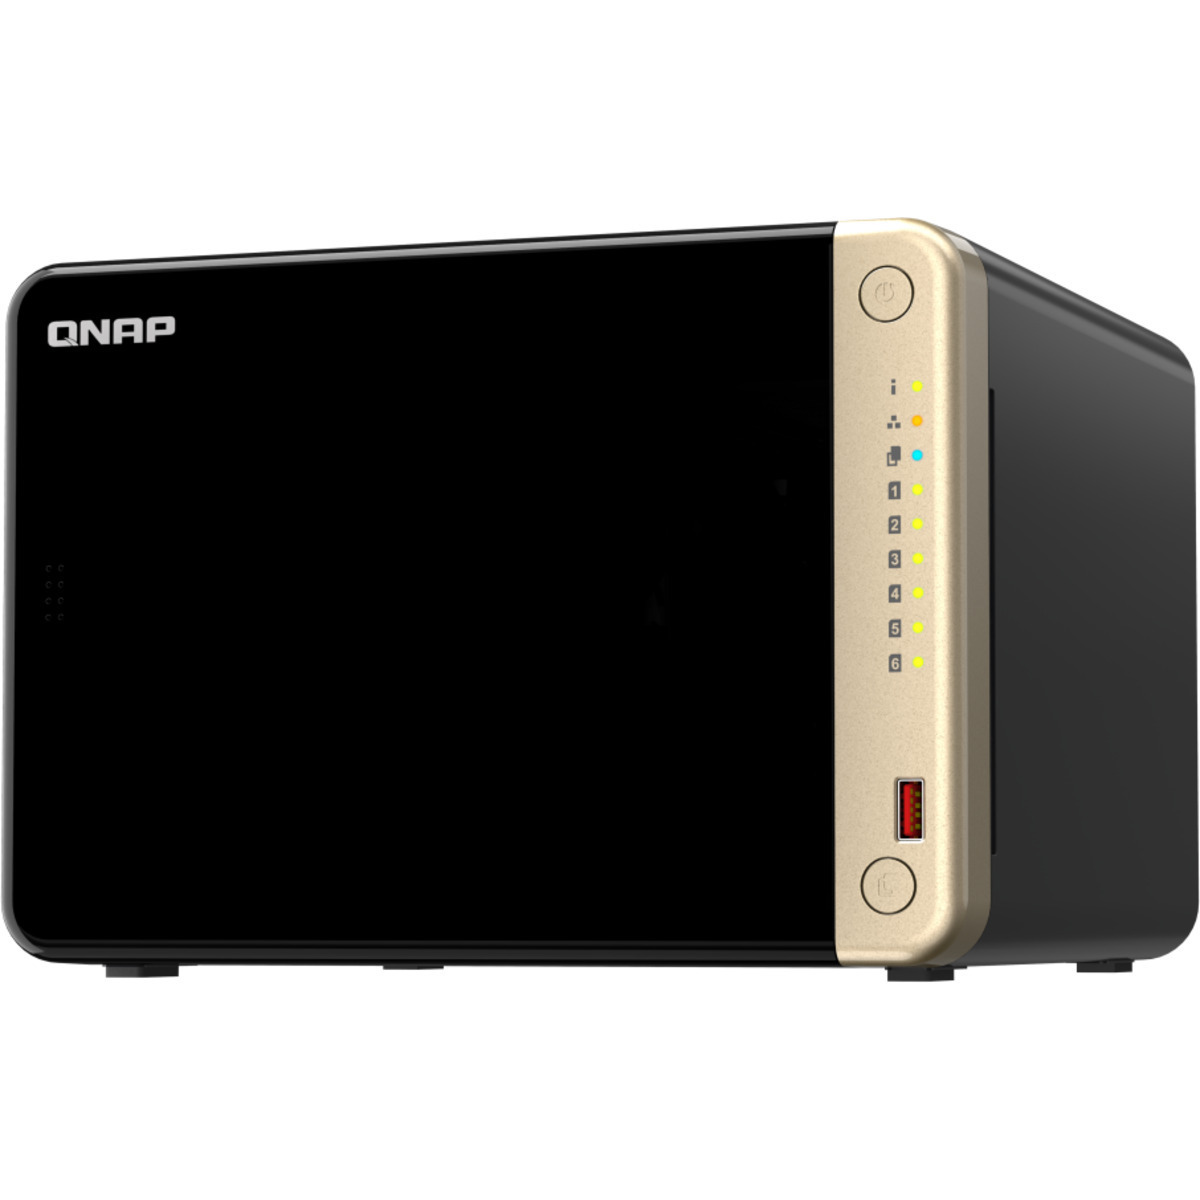 QNAP TS-664 56tb 6-Bay Desktop Multimedia / Power User / Business NAS - Network Attached Storage Device 4x14tb Western Digital Red Pro WD142KFGX 3.5 7200rpm SATA 6Gb/s HDD NAS Class Drives Installed - Burn-In Tested TS-664